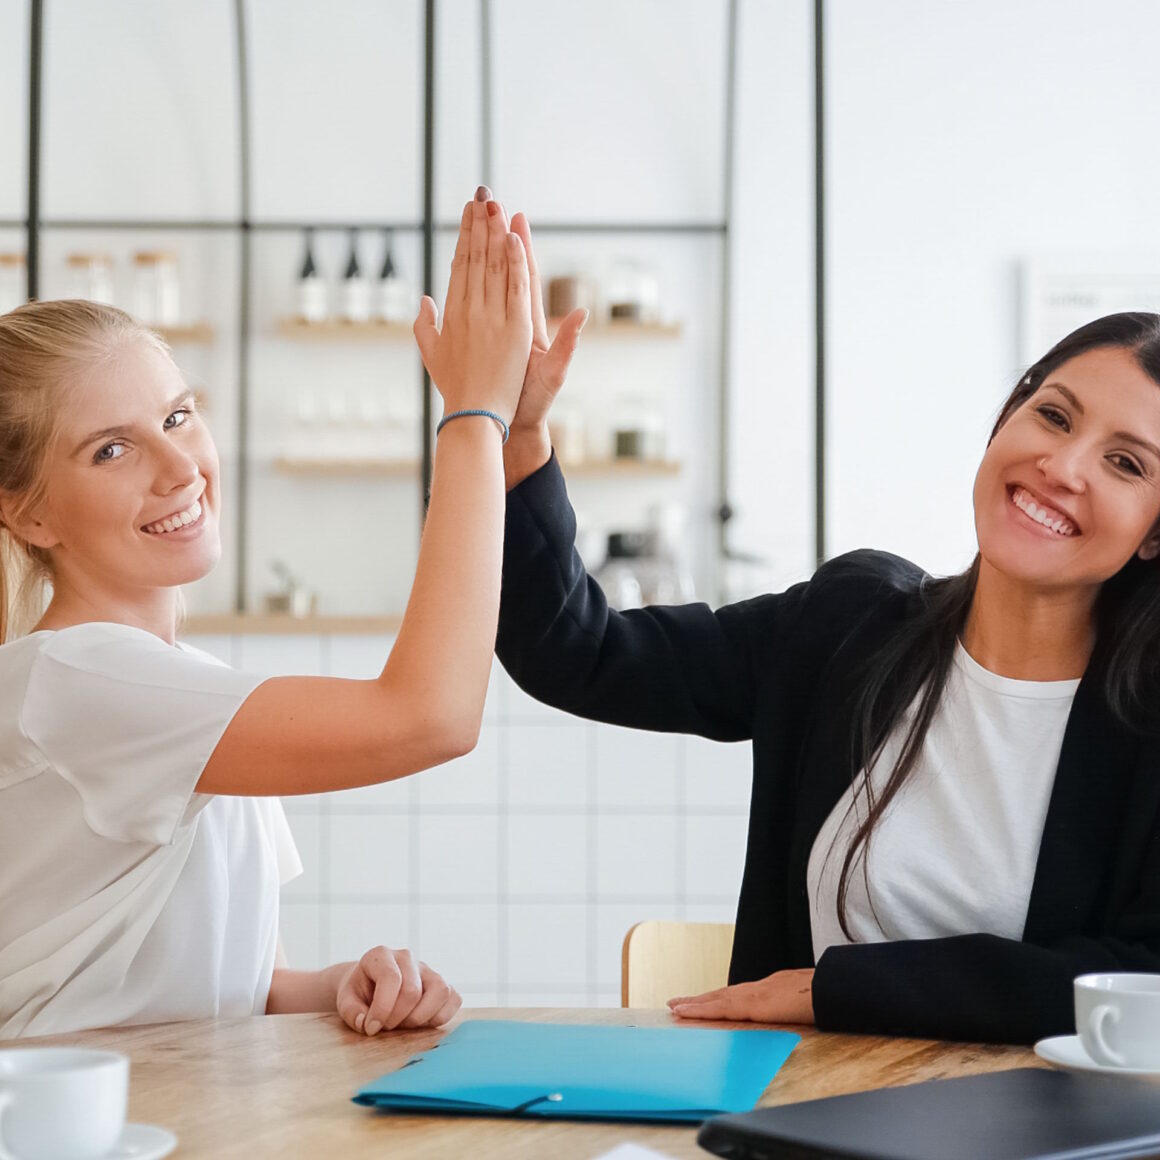 Happy young business women giving high five celebration